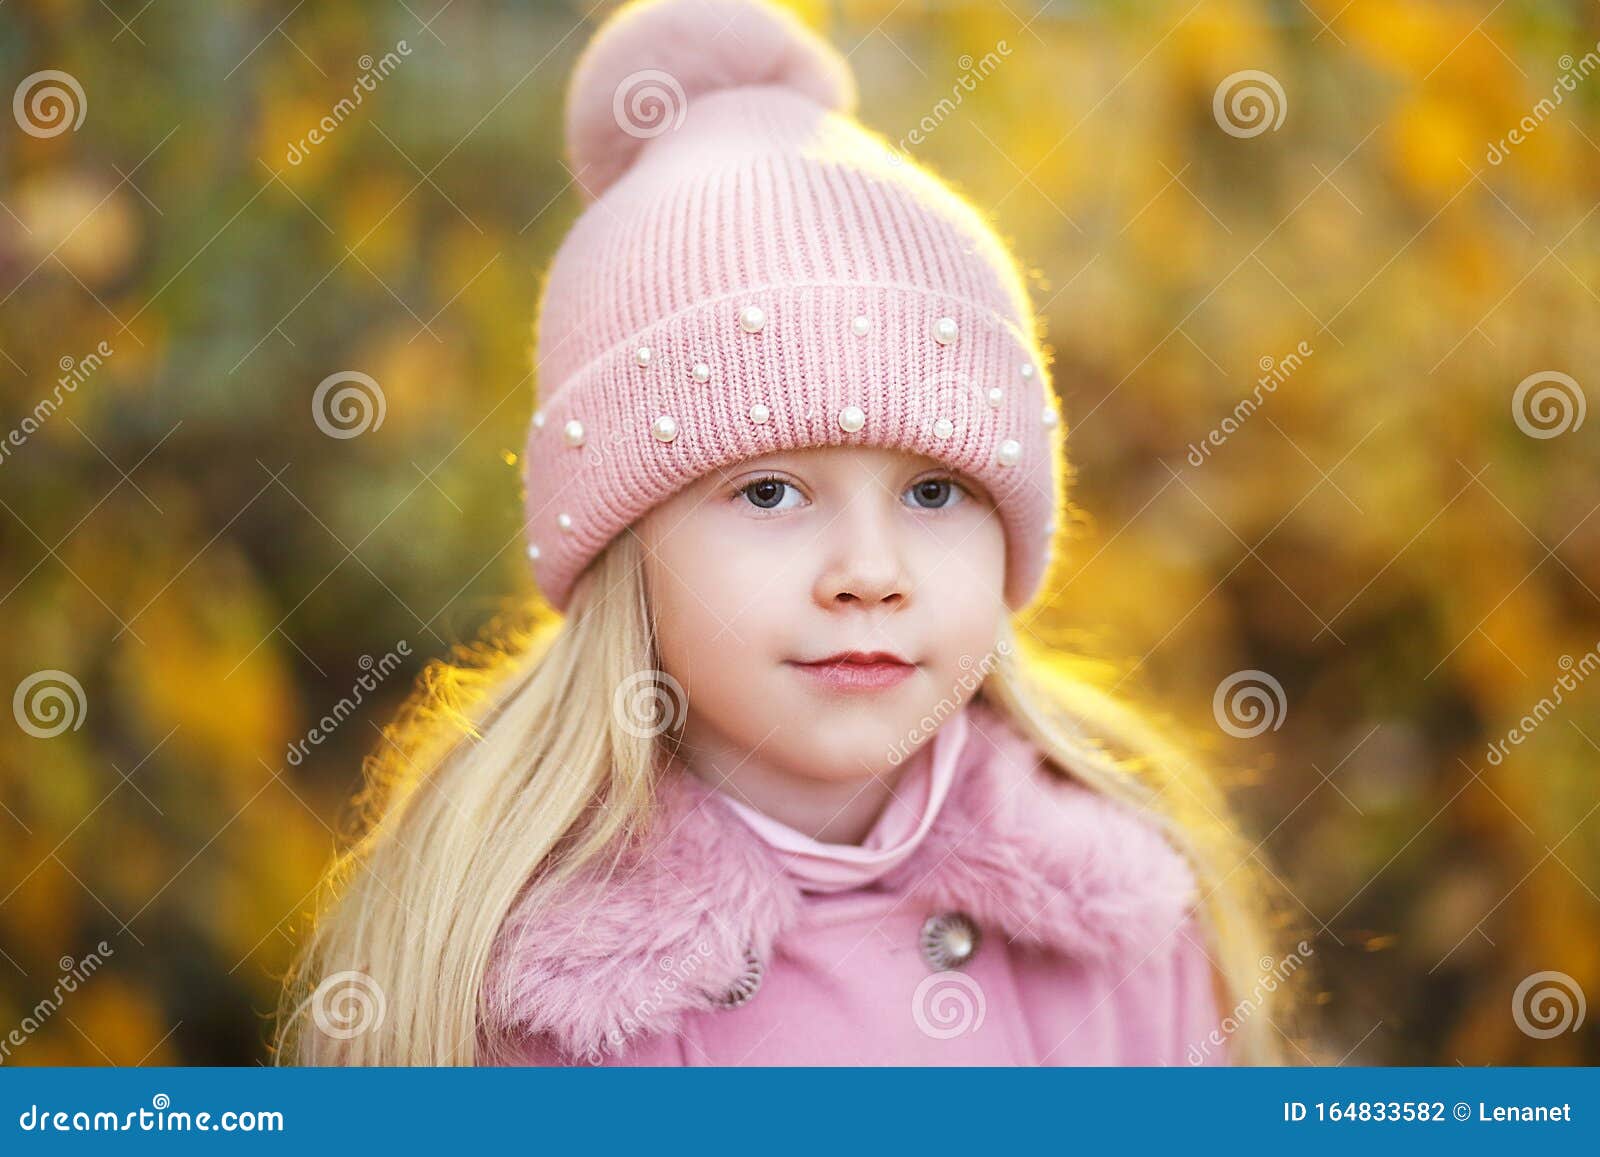 Beautiful Little Girl in Pink Hat Stock Photo - Image of closeup ...